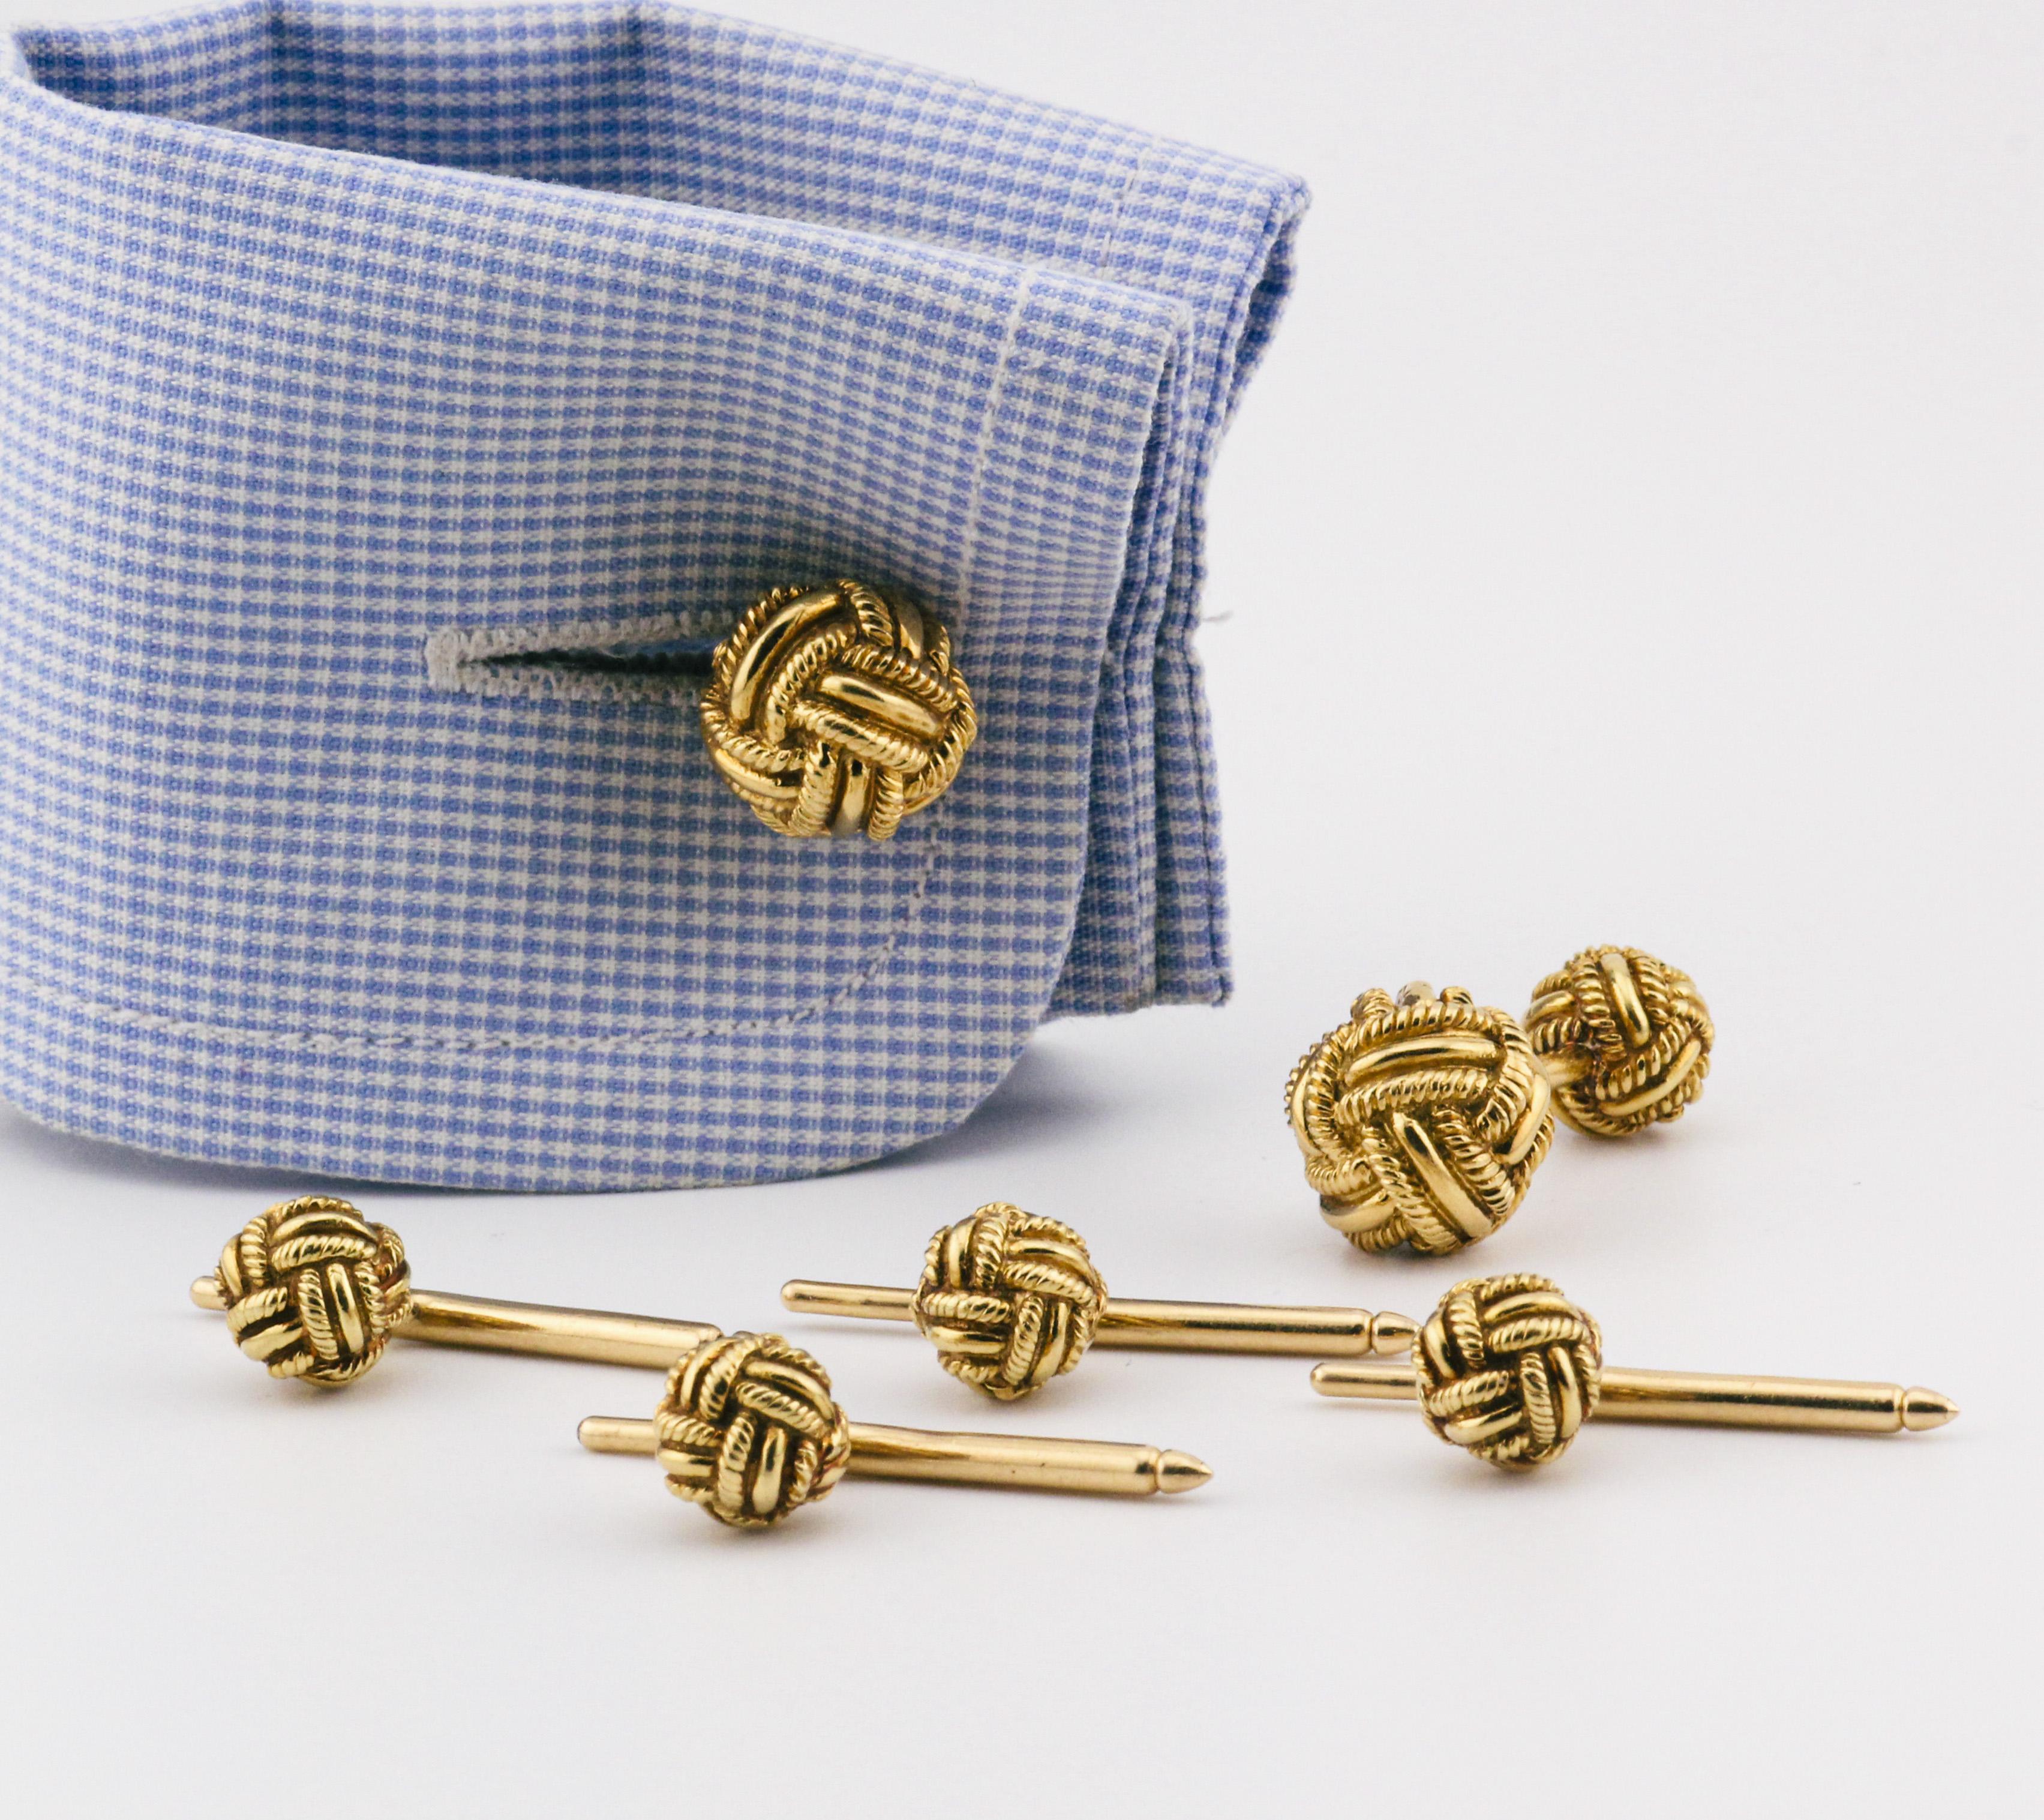 Men's Tiffany & Co. Schlumberger 18K Yellow Gold Rope Knot Cufflinks and 4 Studs Set